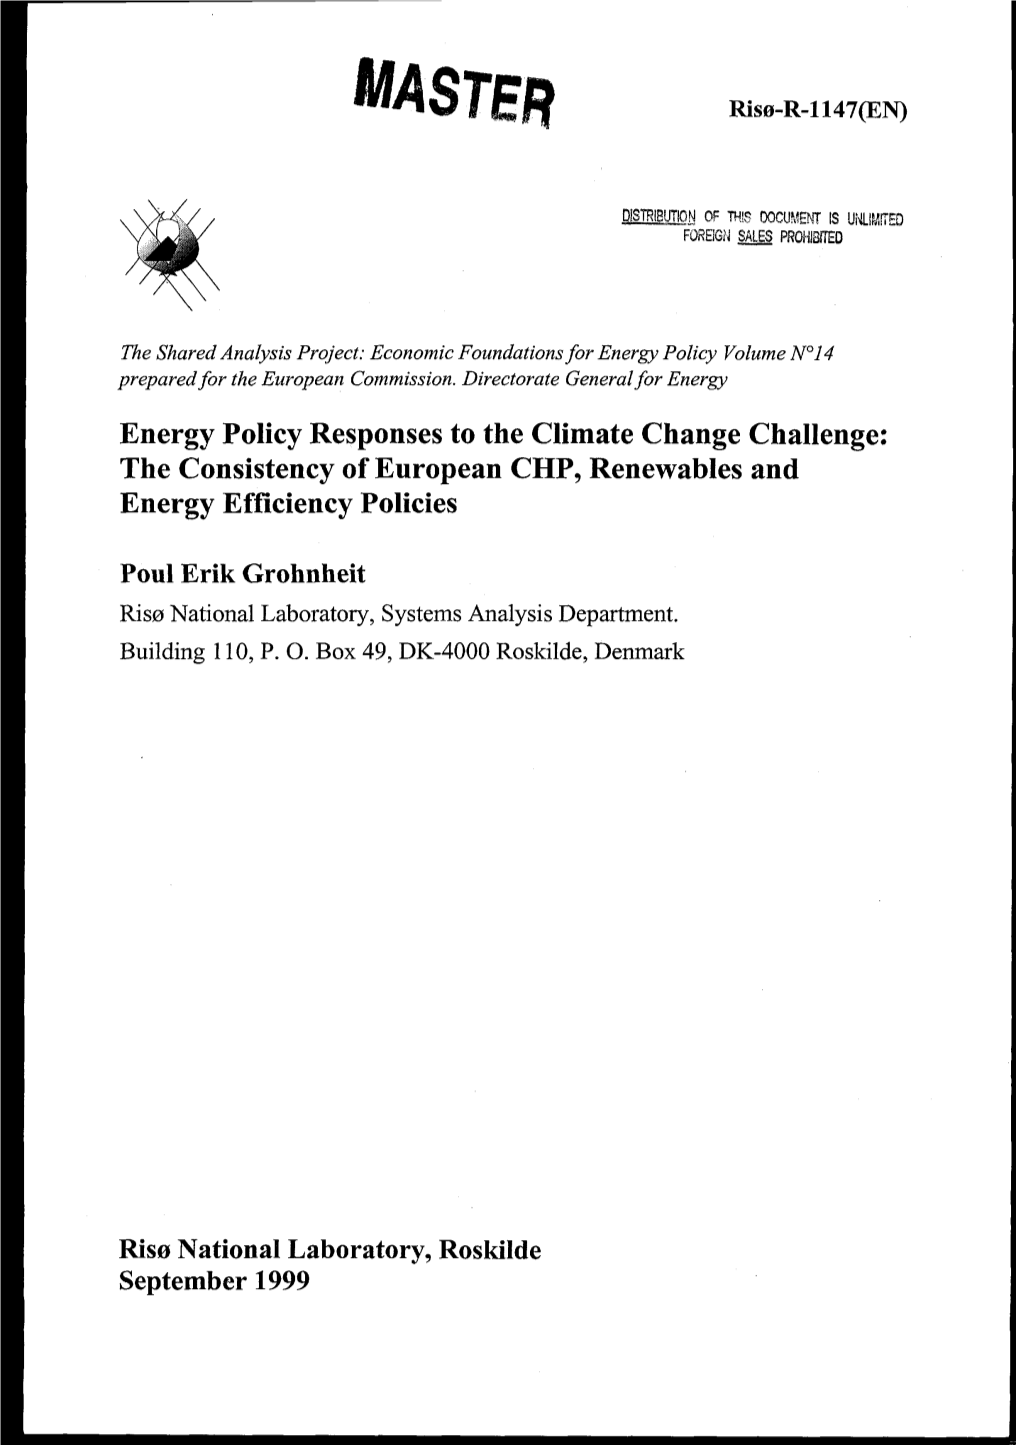 The Consistency of European CHP, Renewable and Energy Efficiency Policies